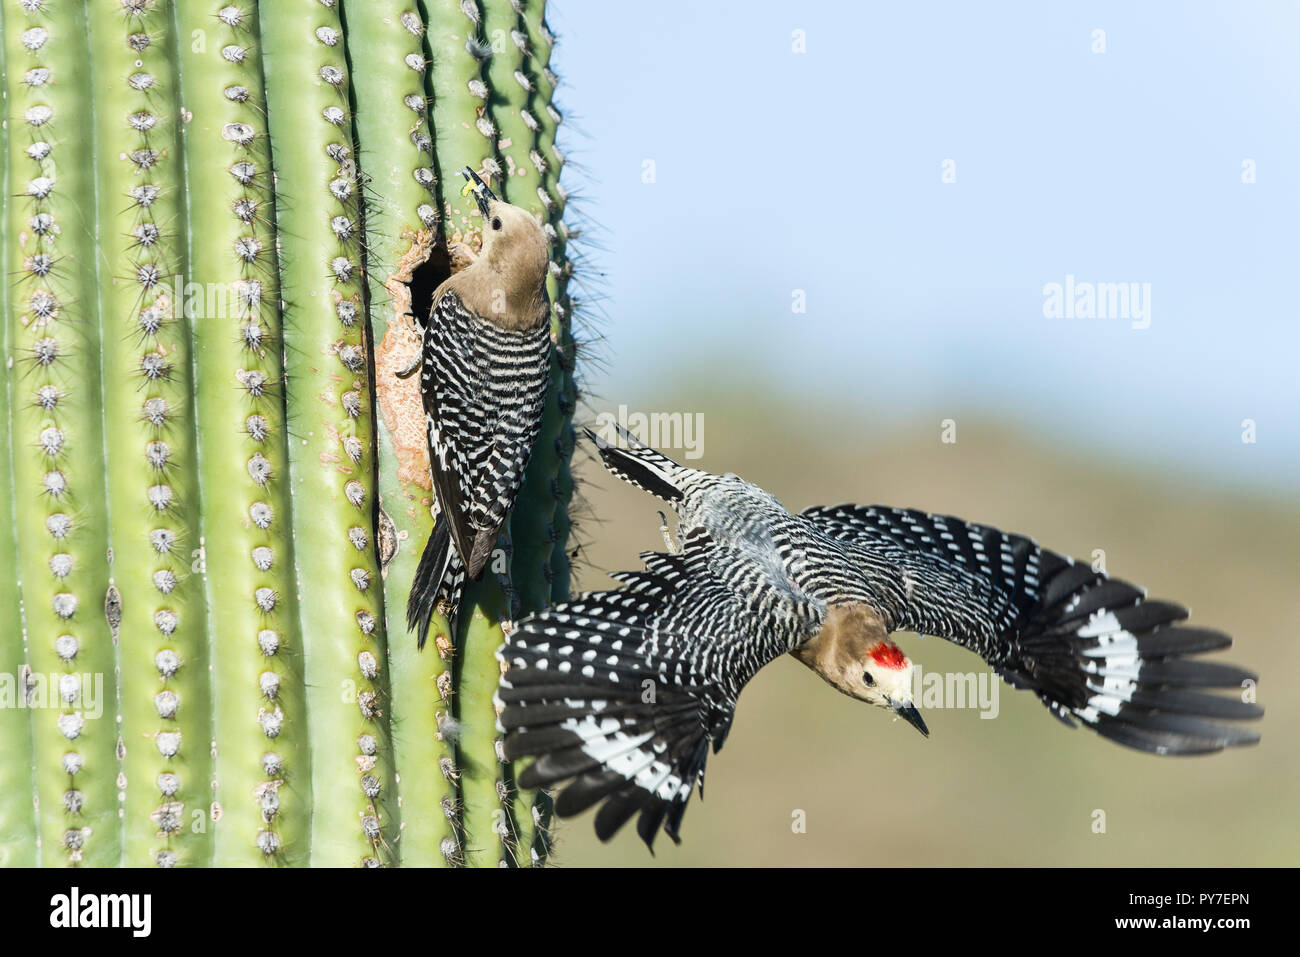 A male Gila Woodpecker (Melanerpes uropygialis) explodes out of a nest in a Saguaro (Carnegiea gigantea), while the female brings food to the young. A Stock Photo